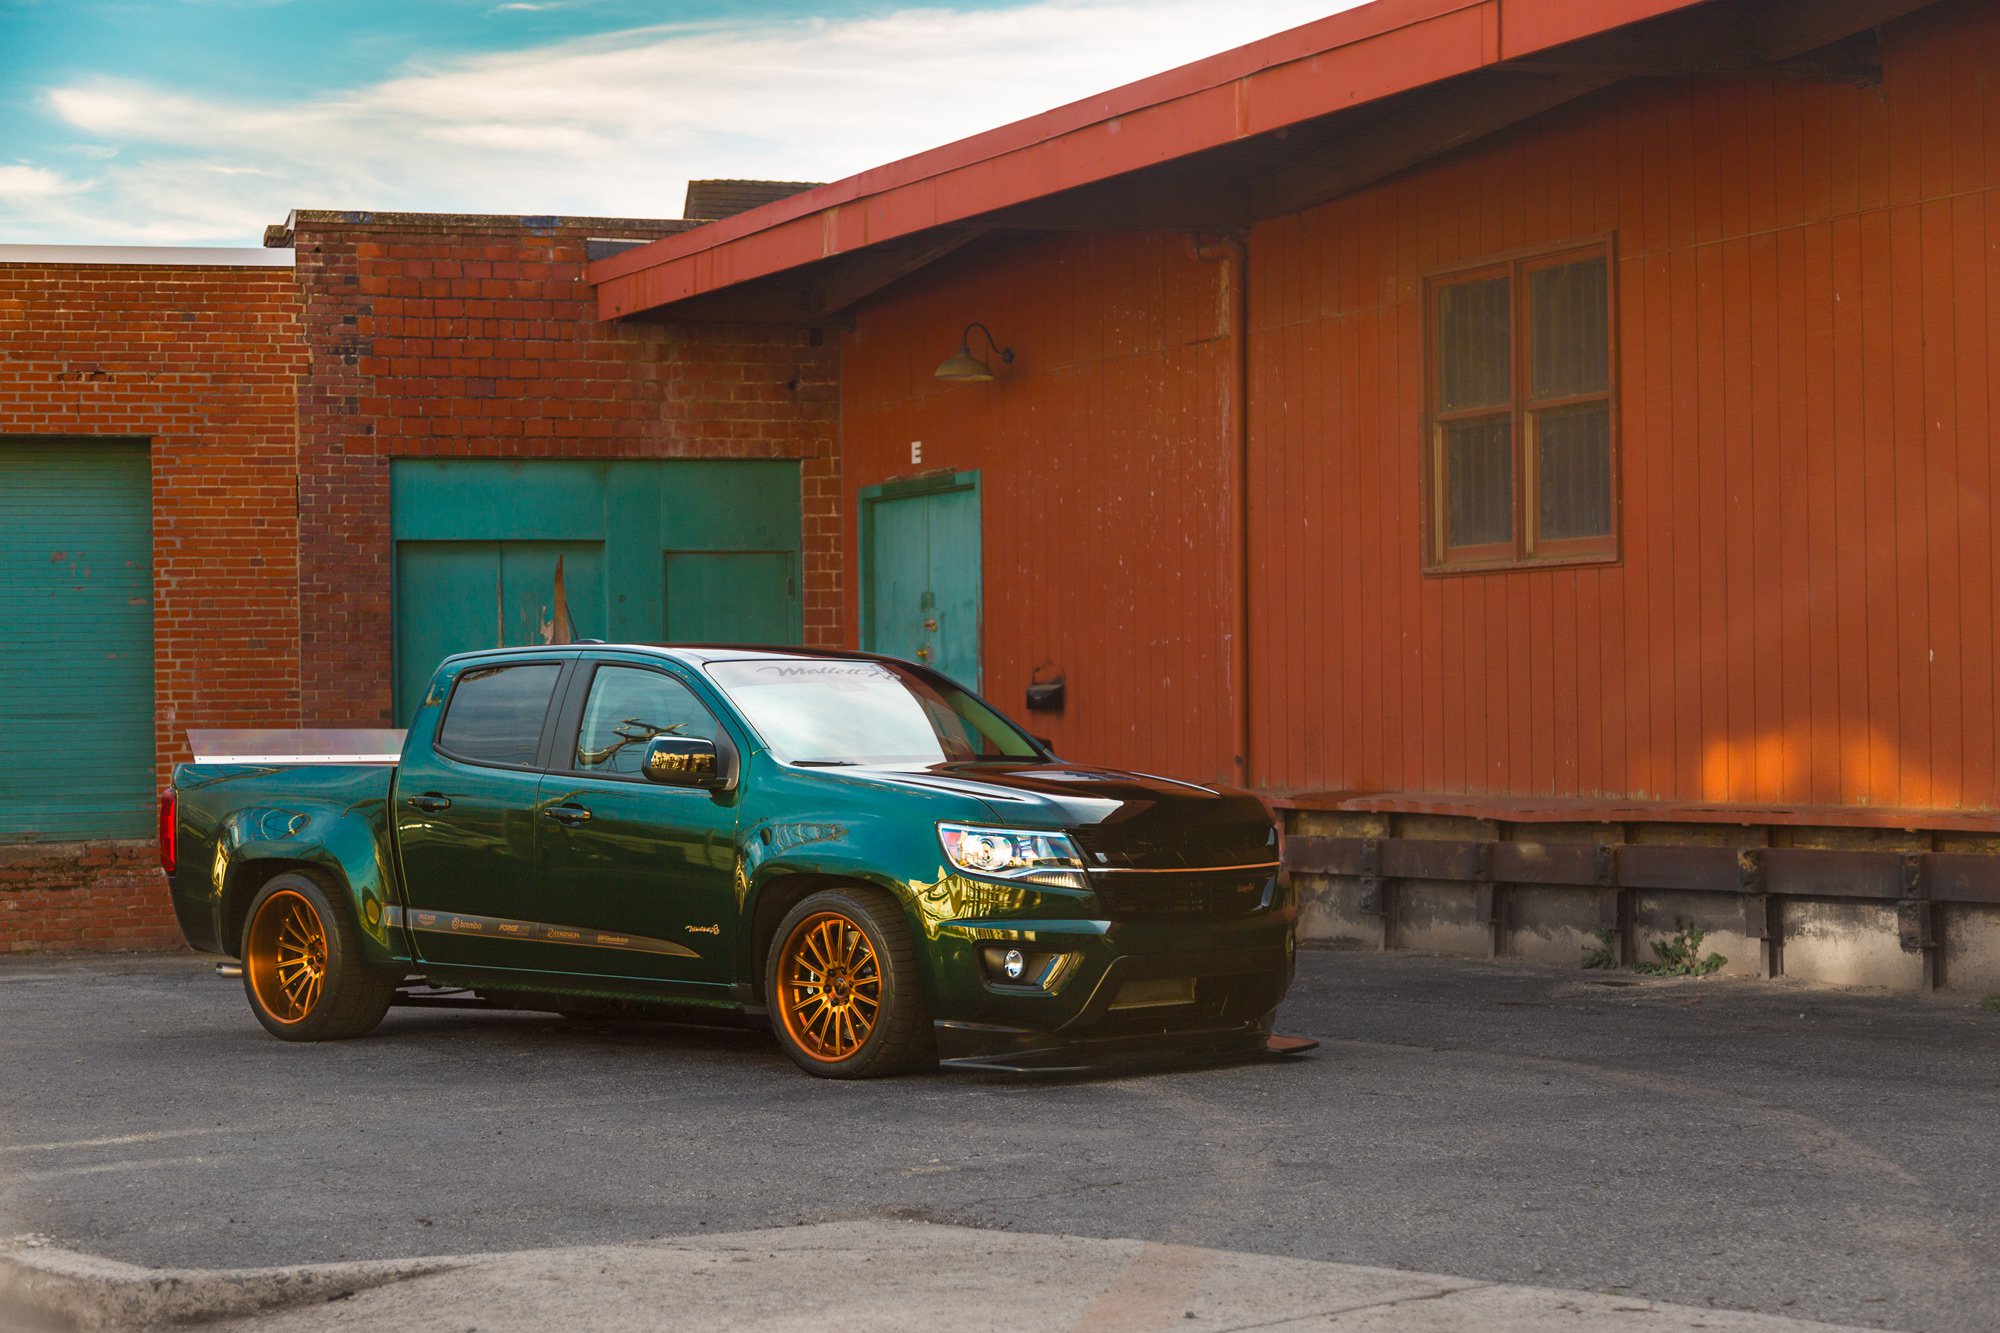 700-HP Chevrolet Colorado By Mallett Performance For Sale.